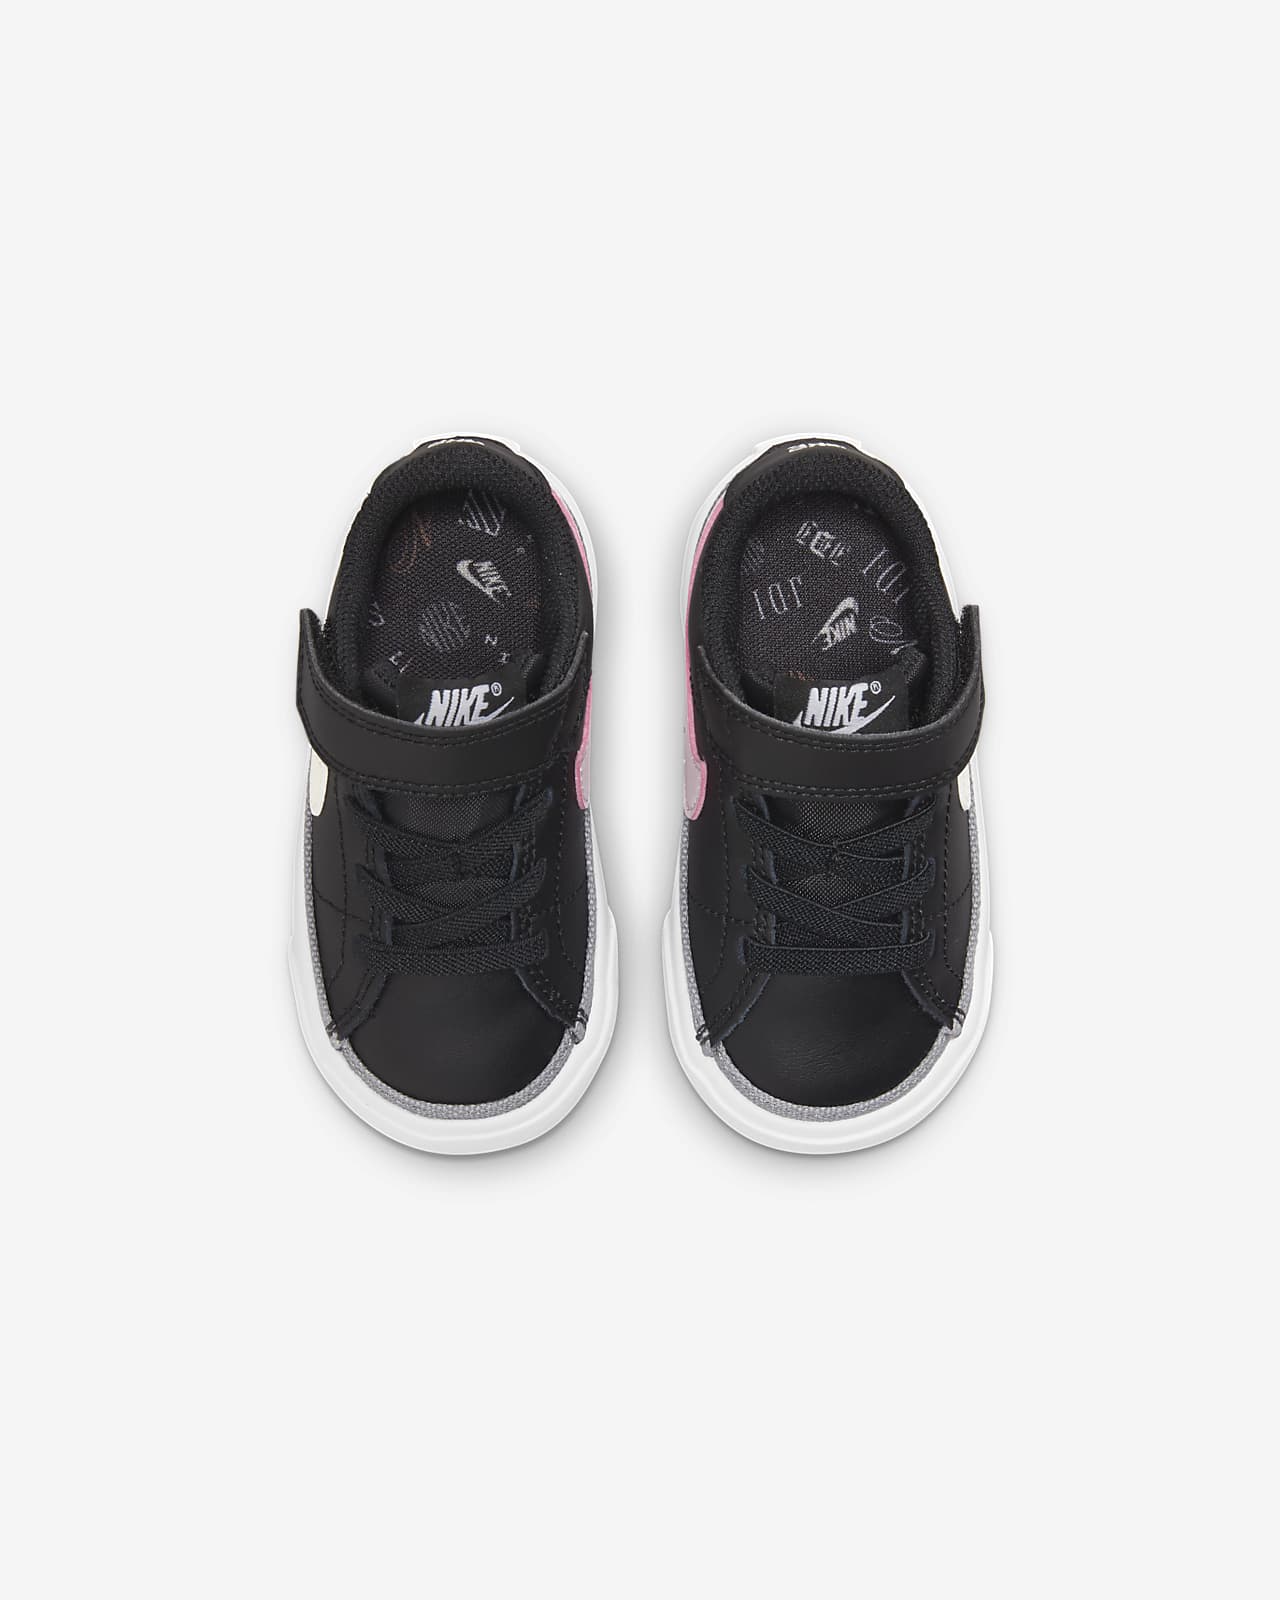 nike velcro sandals for toddlers